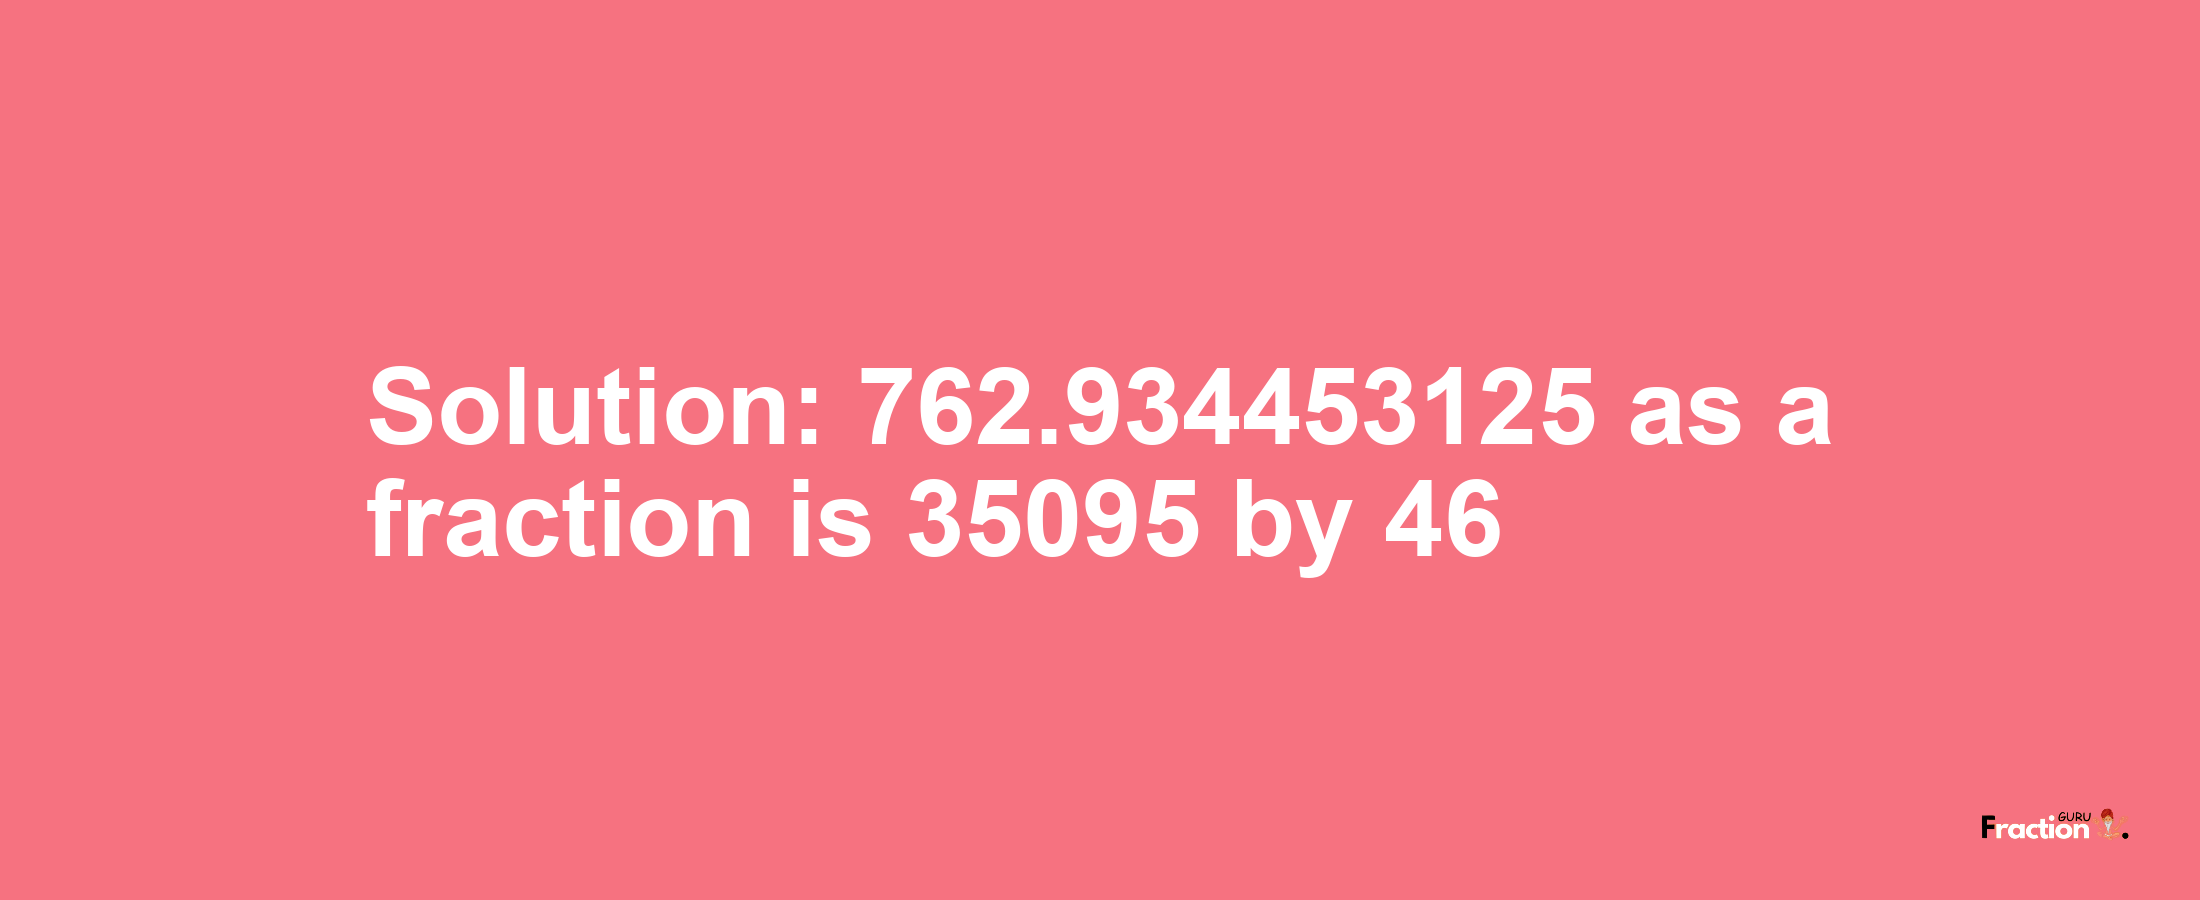 Solution:762.934453125 as a fraction is 35095/46